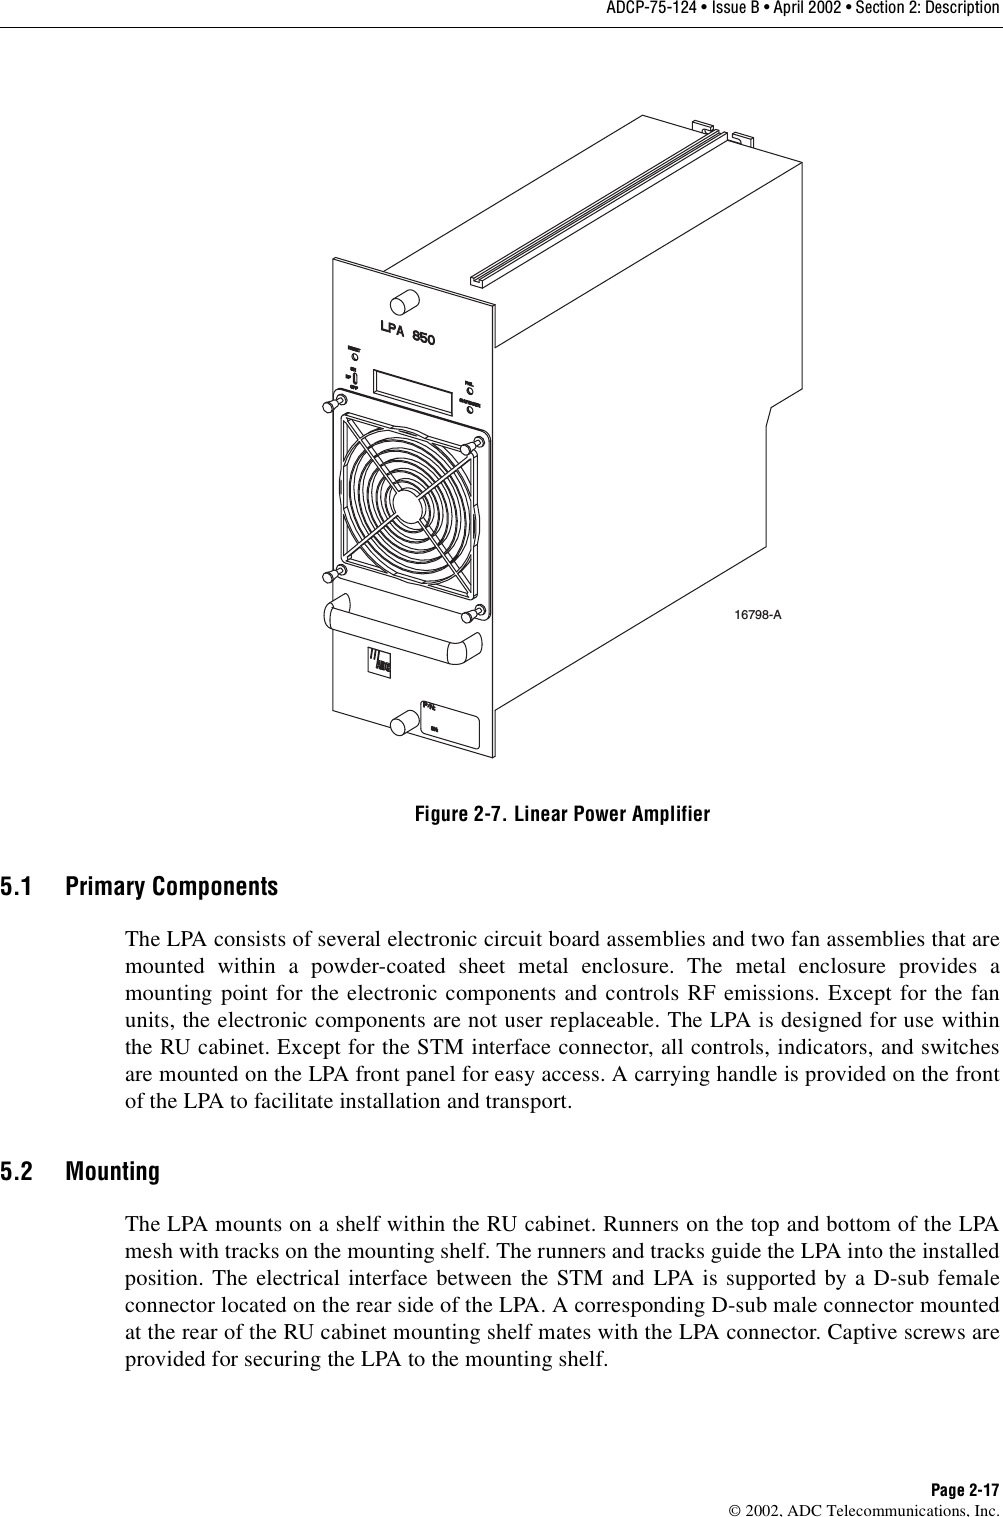 ADCP-75-124 • Issue B • April 2002 • Section 2: DescriptionPage 2-17©2002, ADC Telecommunications, Inc.Figure 2-7. Linear Power Amplifier5.1 Primary ComponentsThe LPA consists of several electronic circuit board assemblies and two fan assemblies that aremounted within apowder-coated sheet metal enclosure. The metal enclosure provides amounting point for the electronic components and controls RF emissions. Except for the fanunits, the electronic components are not user replaceable. The LPA is designed for use withinthe RU cabinet. Except for the STM interface connector, all controls, indicators, and switchesare mounted on the LPA front panel for easy access. Acarrying handle is provided on the frontof the LPA to facilitate installation and transport.5.2 MountingThe LPA mounts on ashelf within the RU cabinet. Runners on the top and bottom of the LPAmesh with tracks on the mounting shelf. The runners and tracks guide the LPA into the installedposition. The electrical interface between the STM and LPA is supported by aD-sub femaleconnector located on the rear side of the LPA. Acorresponding D-sub male connector mountedat the rear of the RU cabinet mounting shelf mates with the LPA connector. Captive screws areprovided for securing the LPA to the mounting shelf.16798-A